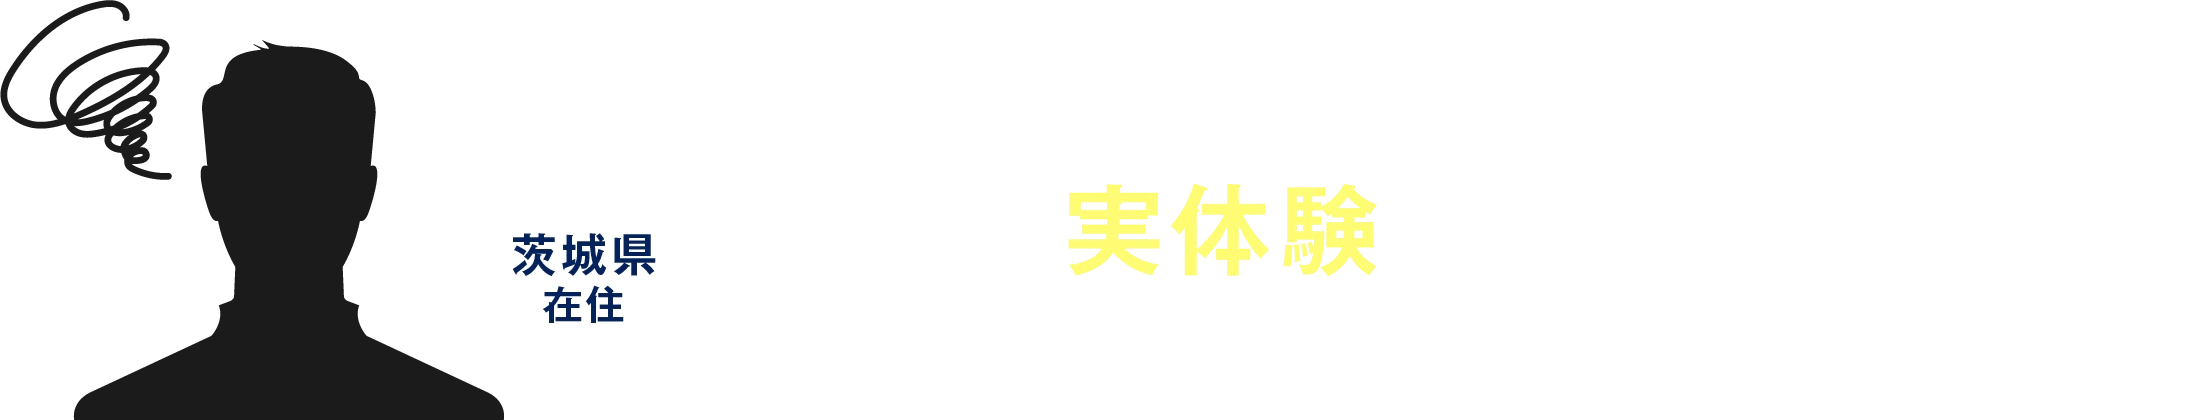 Aさんの実体験をご紹介します。